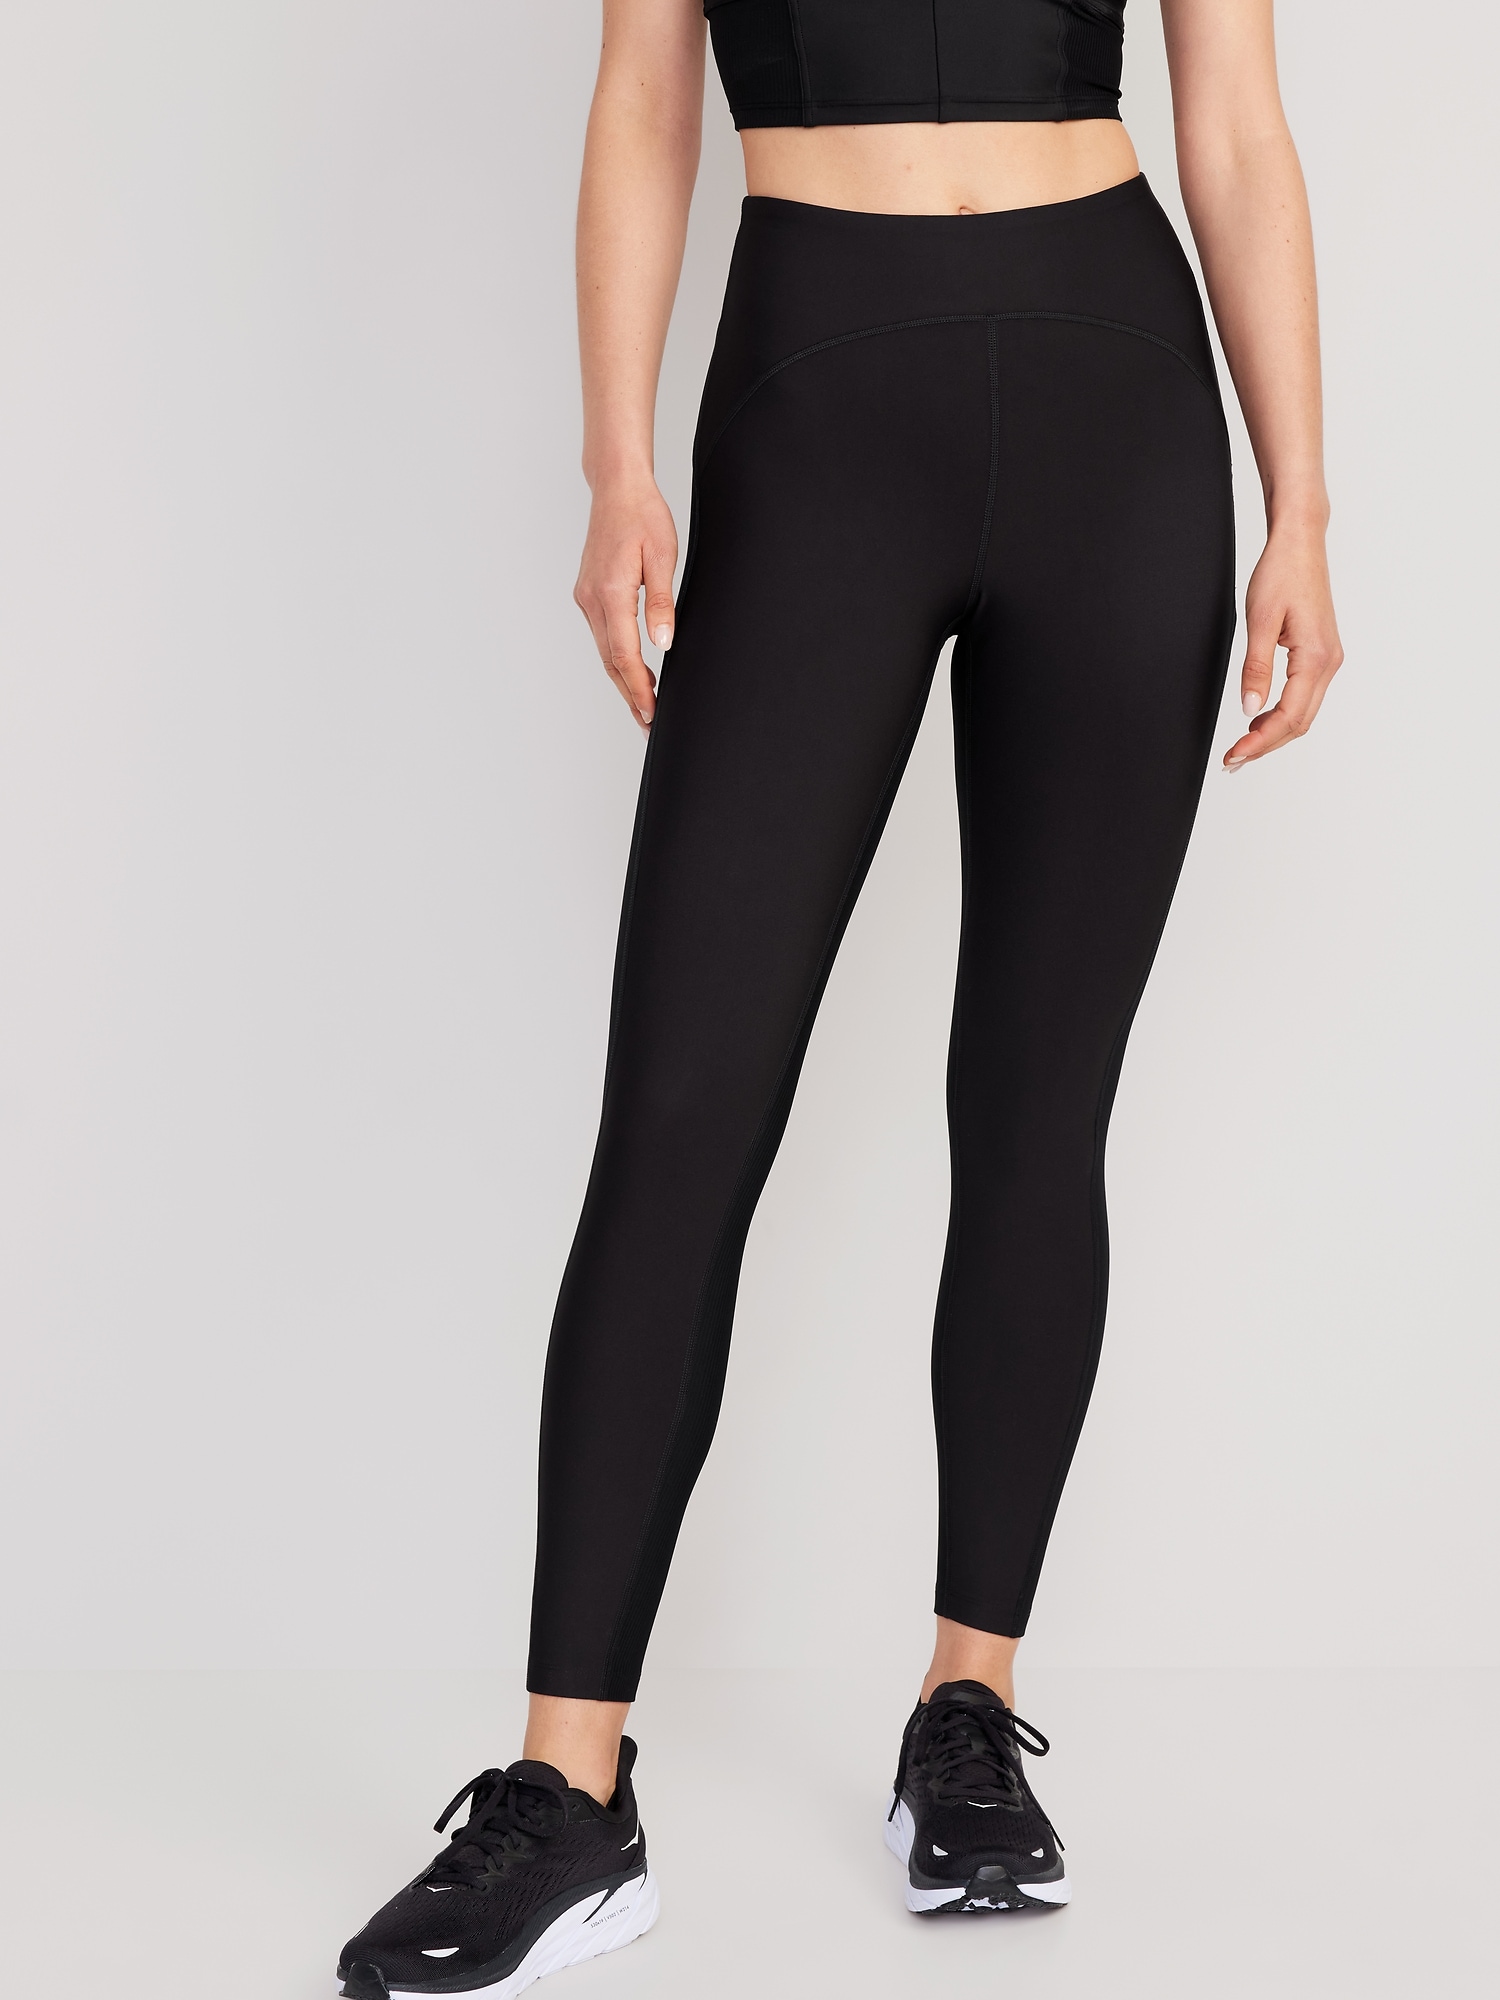 Old Navy High-Waisted PowerSoft 7/8 Mixed-Fabric Leggings for Women black. 1